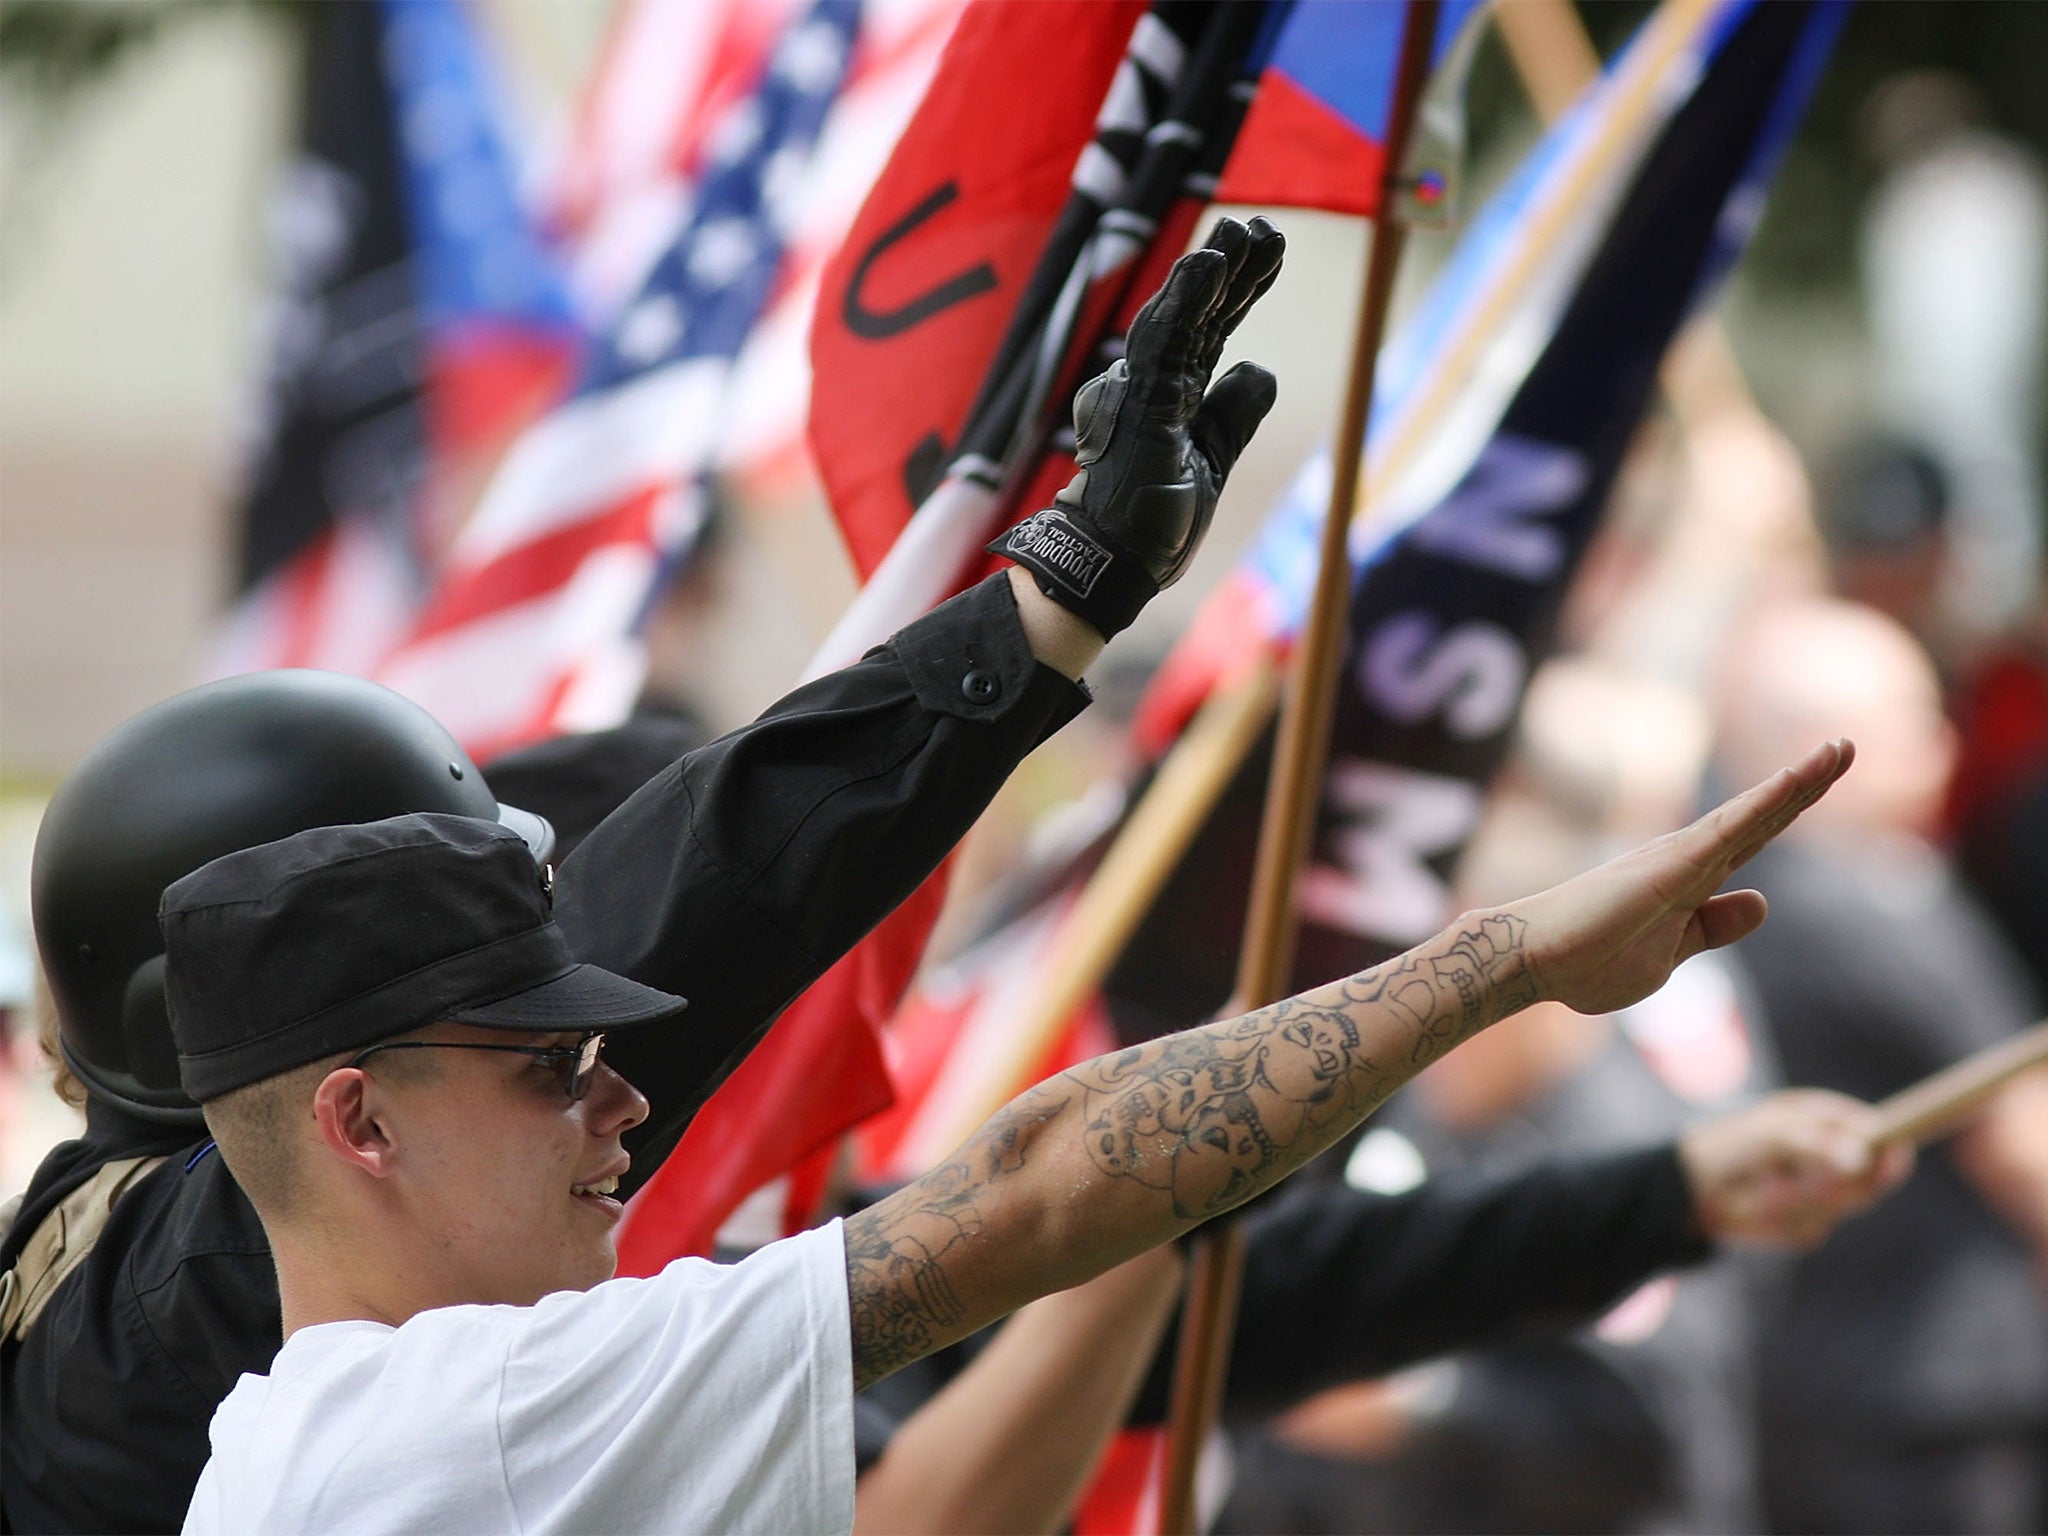 There are 784 hate groups operating in the United States